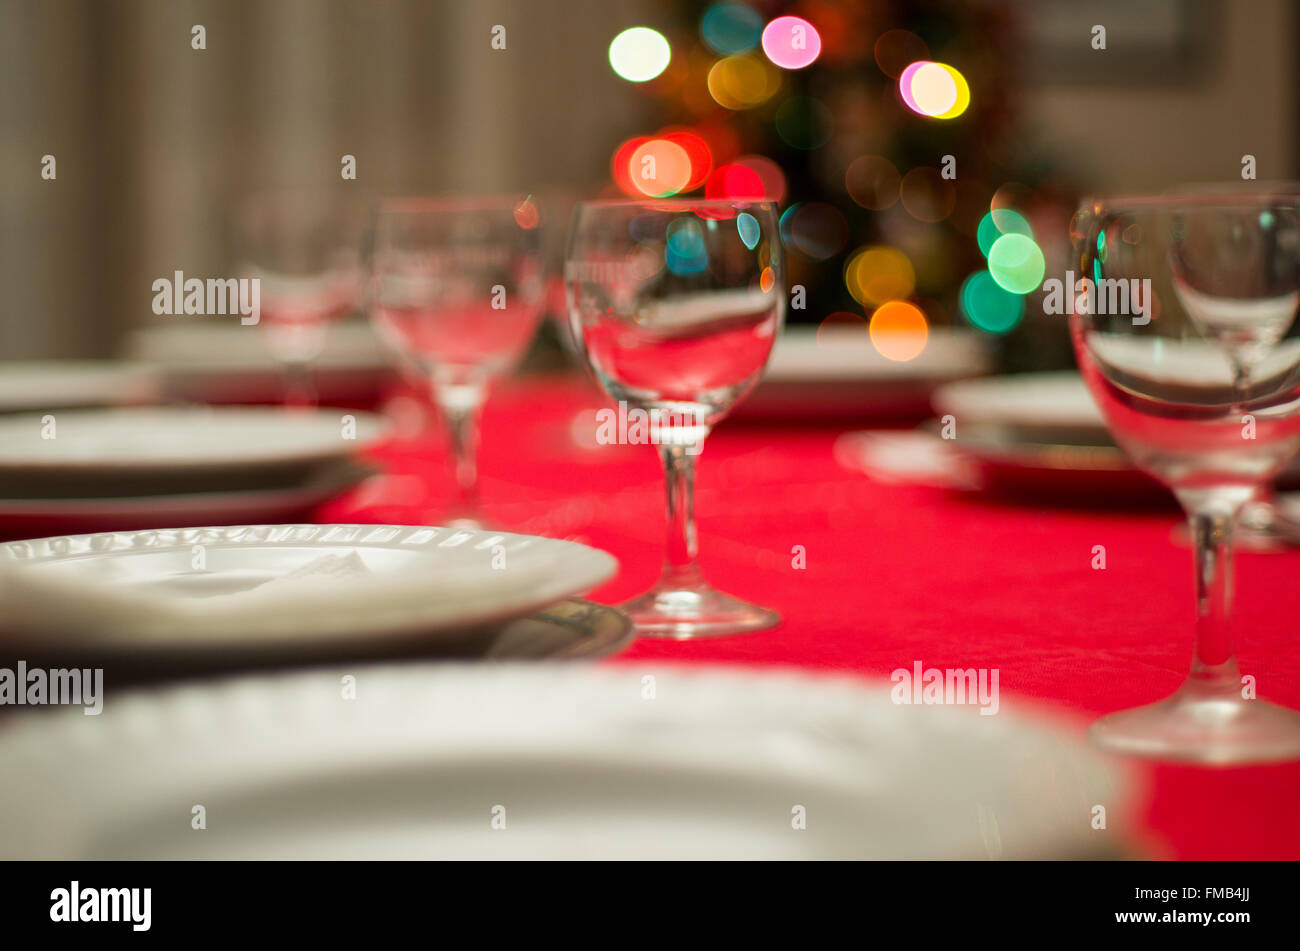 Christmas table for holiday red in family Stock Photo